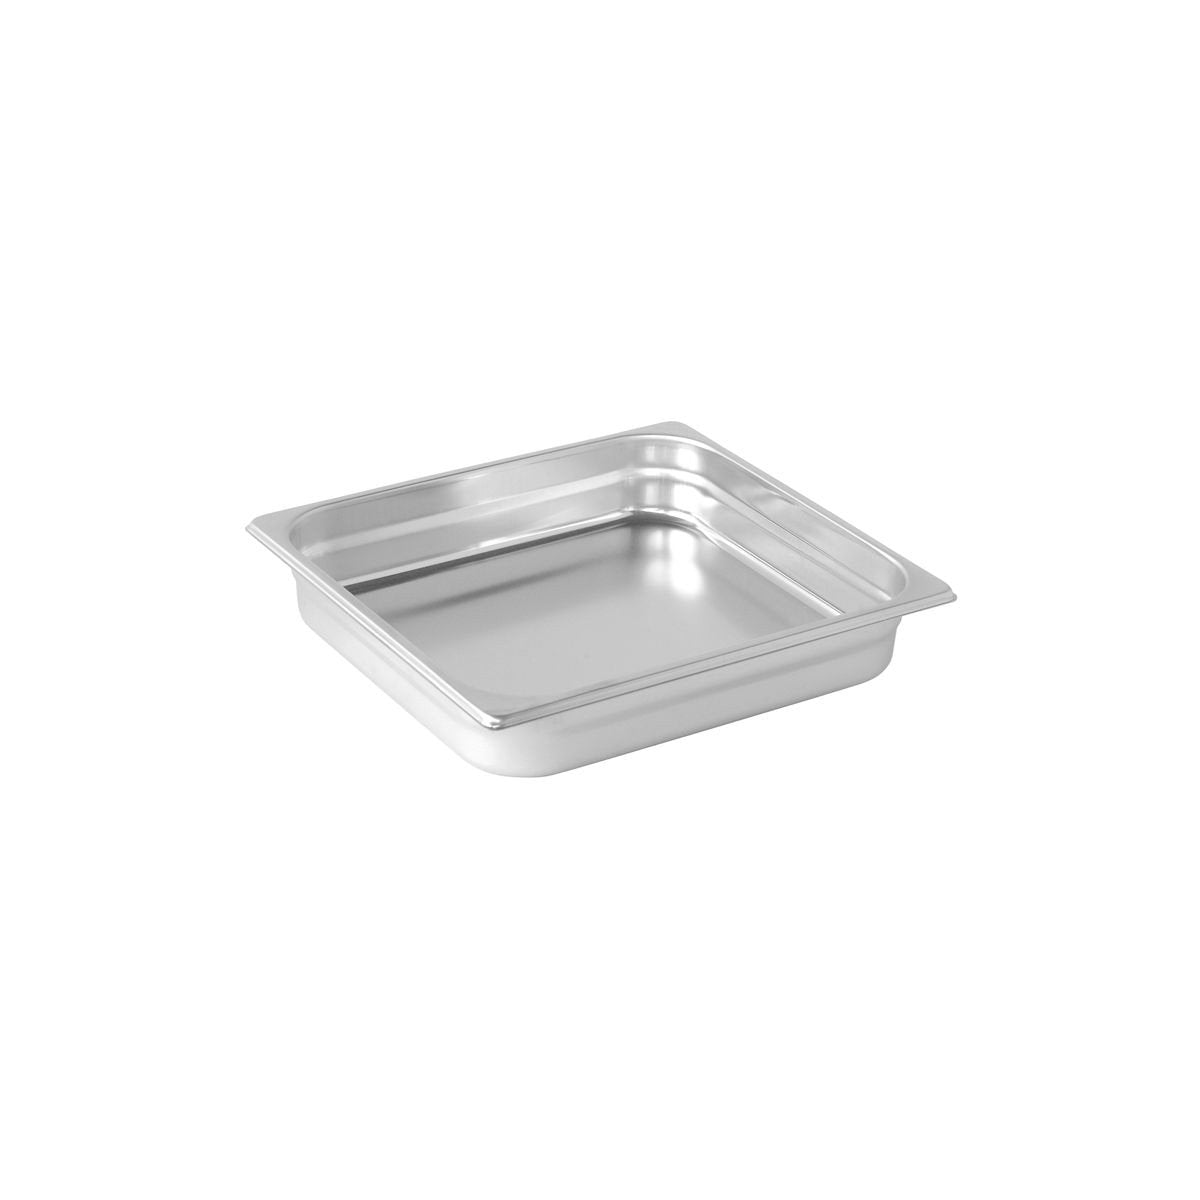 GASTRONORM PAN - 18/10, 2/3 SIZE 65mm